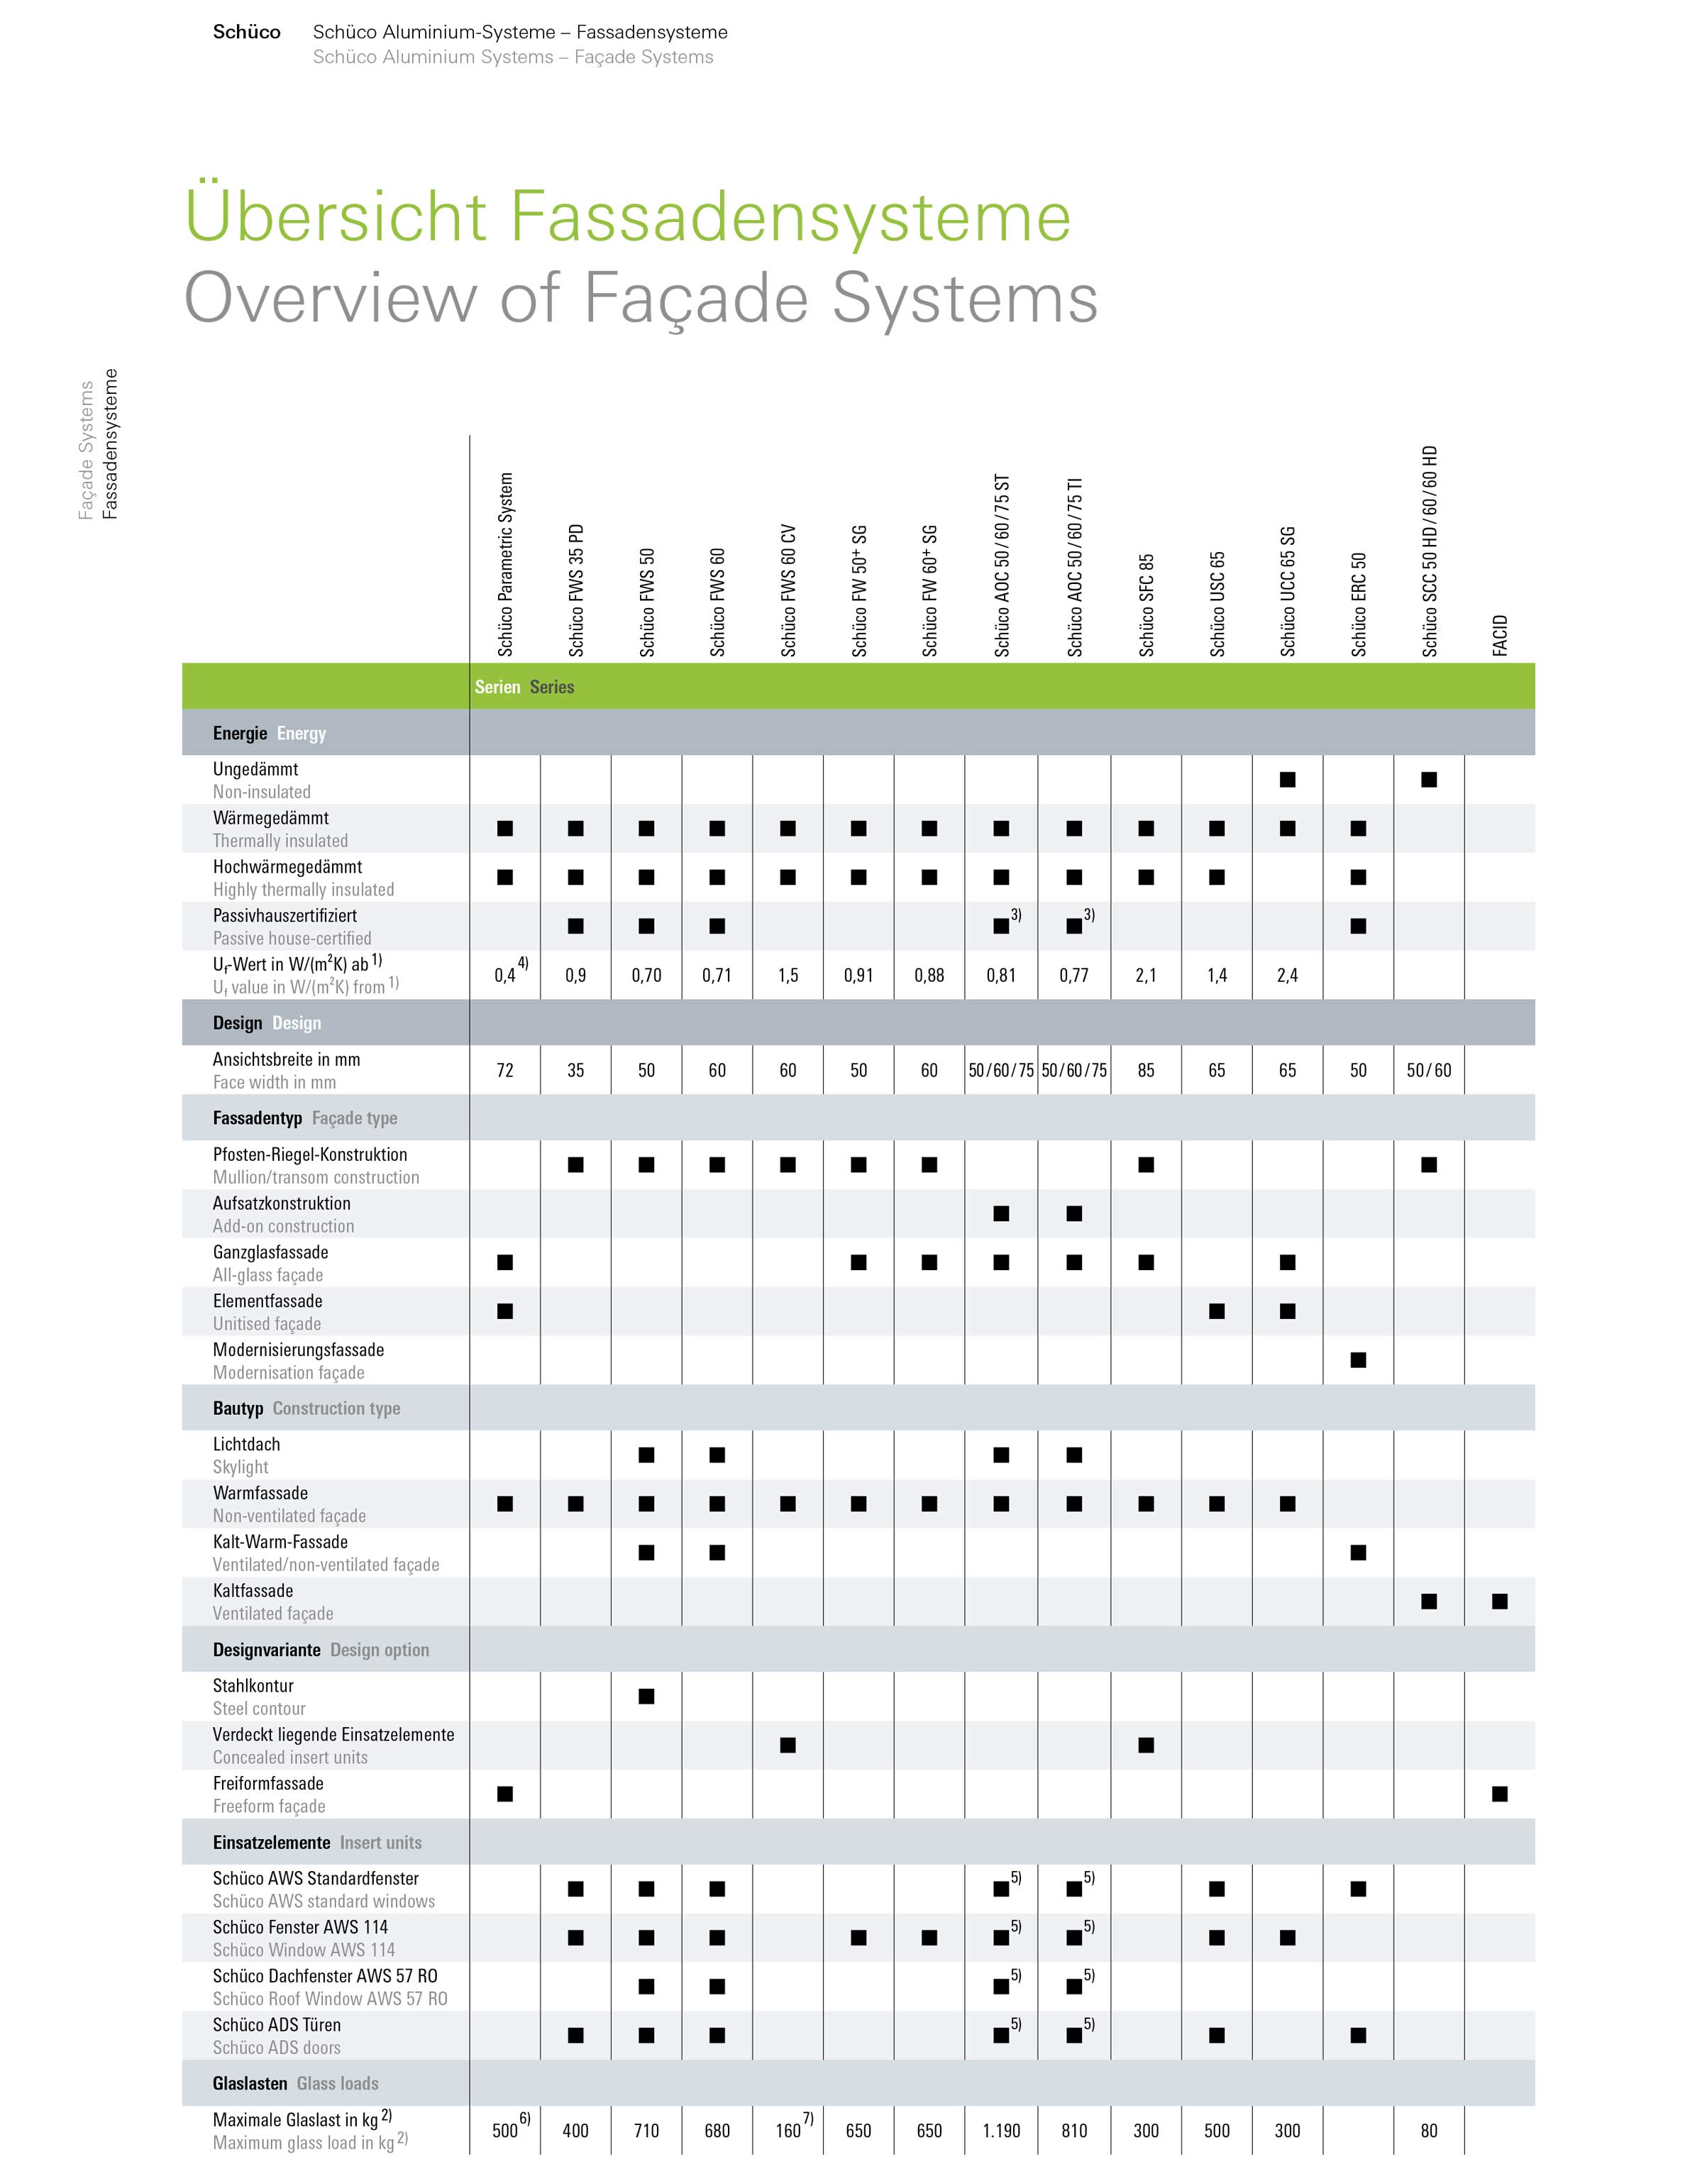 Overview of Facade Systems